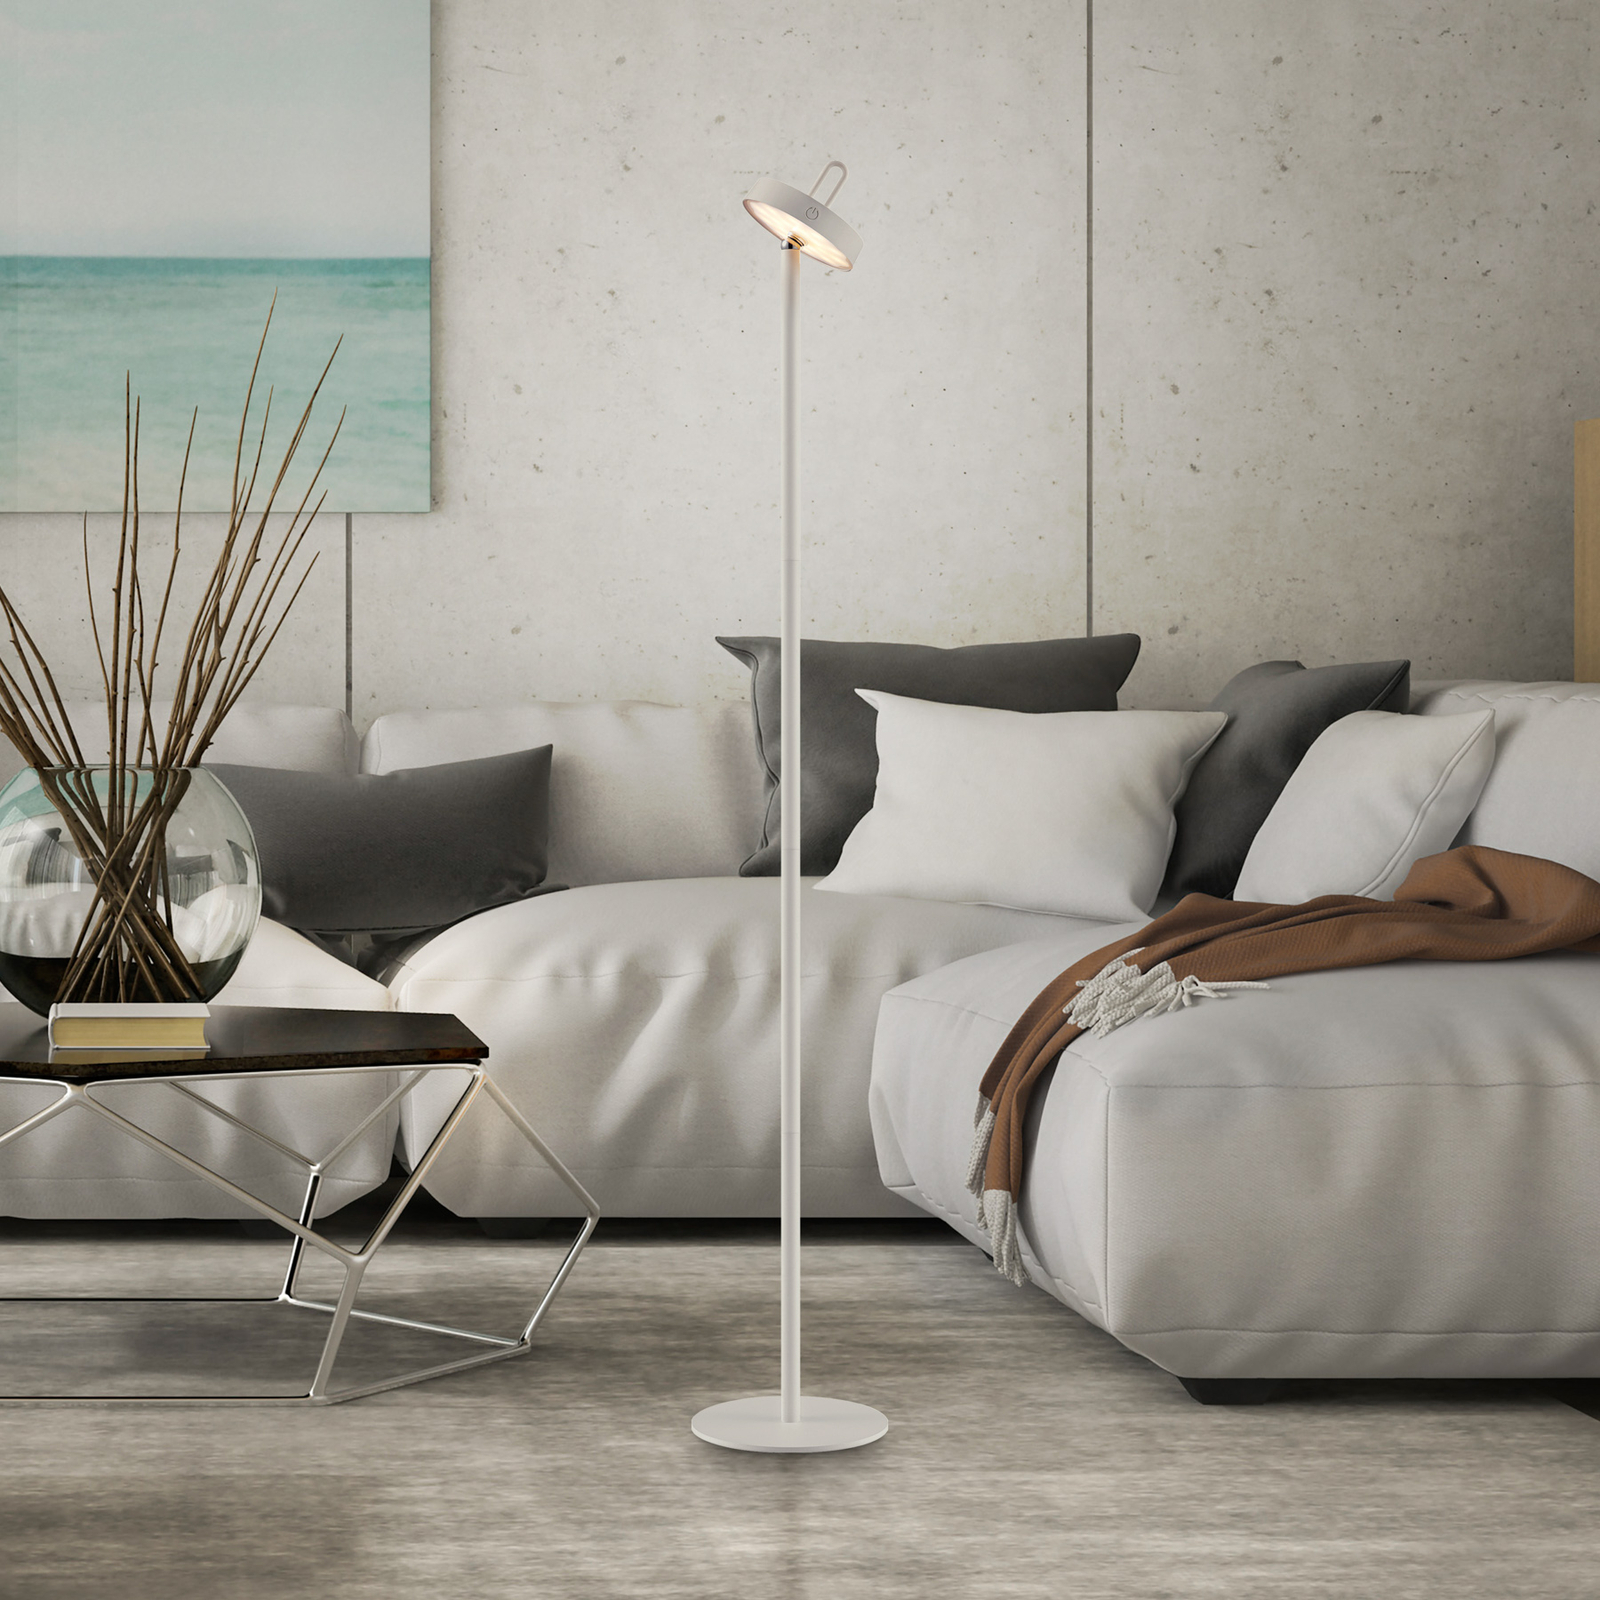 JUST LIGHT. Amag rechargeable LED floor lamp, grey-beige iron IP44